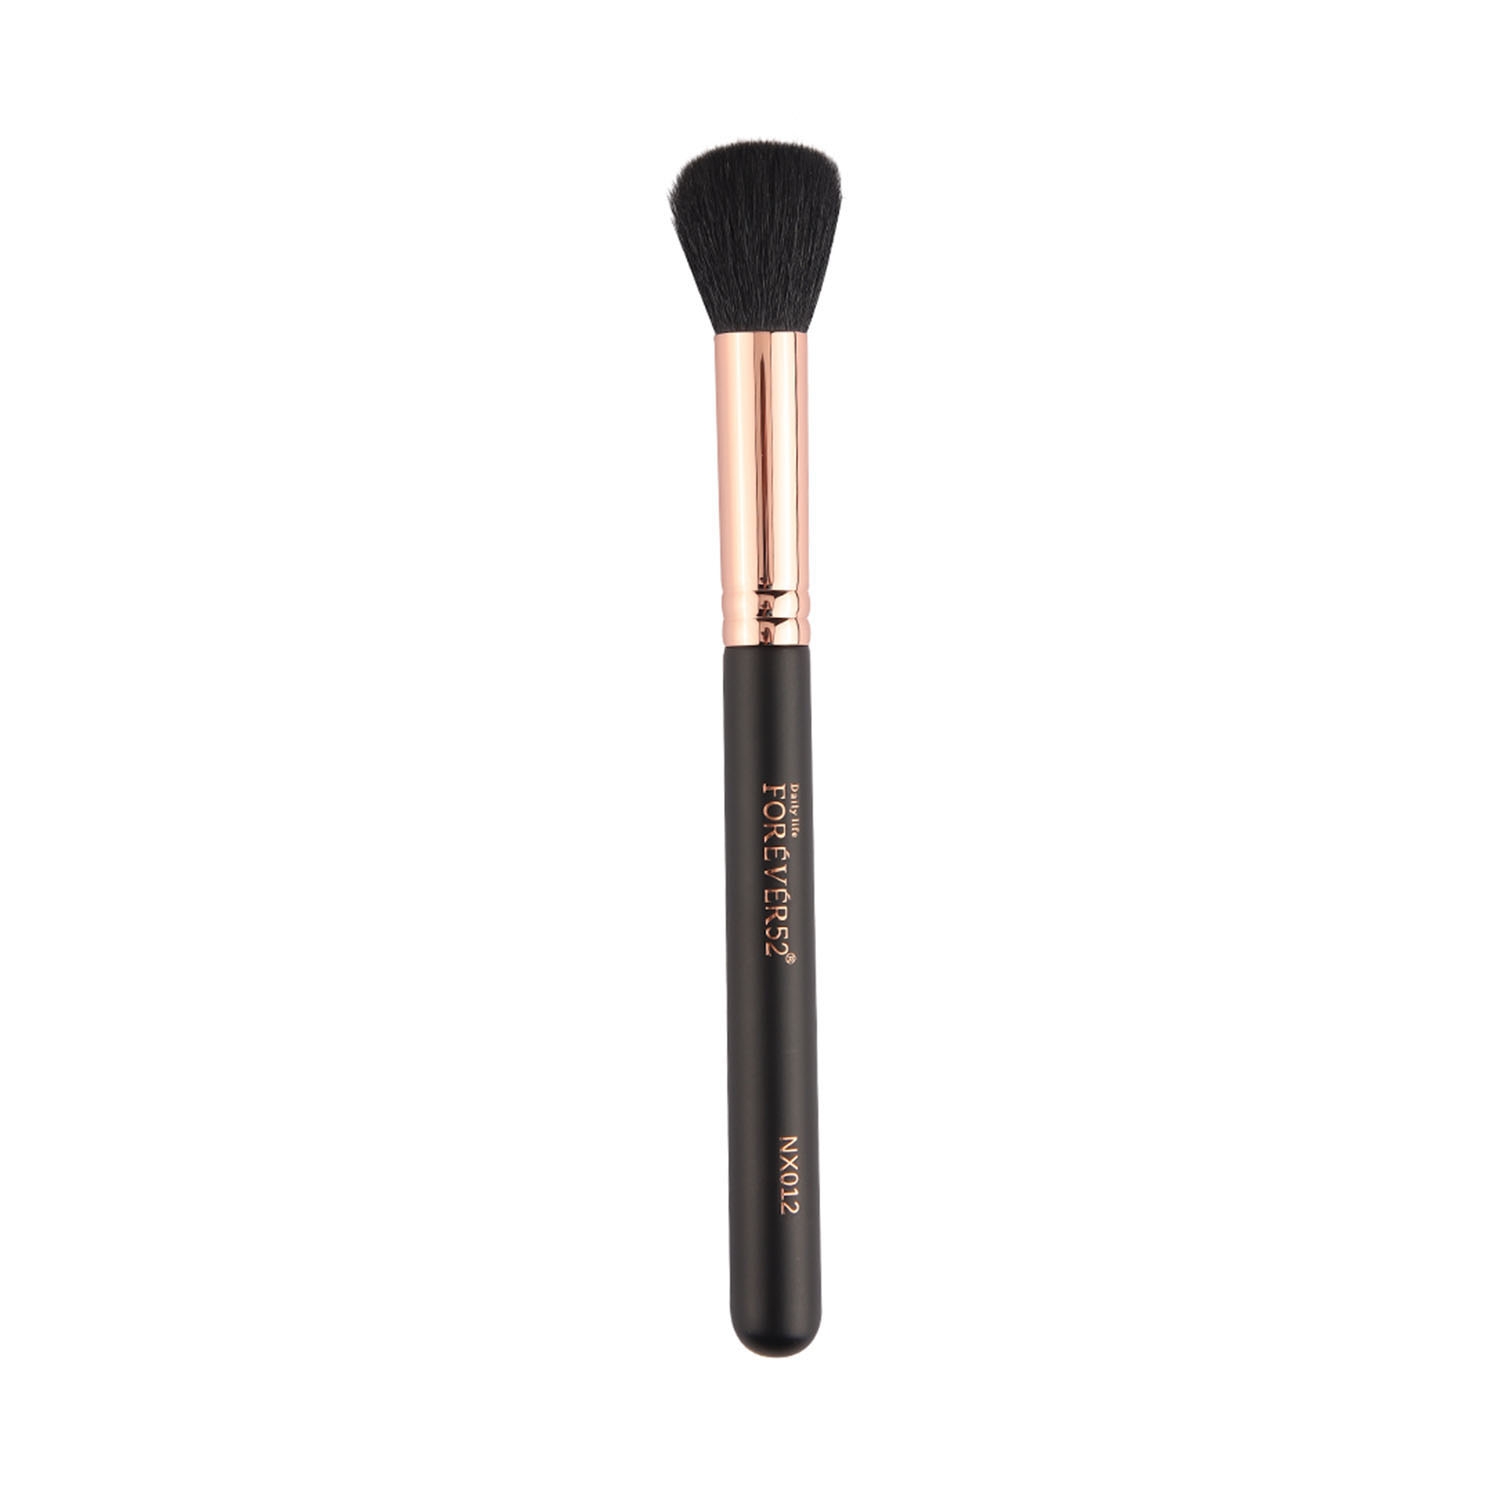 Daily Life Forever52 | Daily Life Forever52 Powder / Blush Brush - NX012 (1Pc)